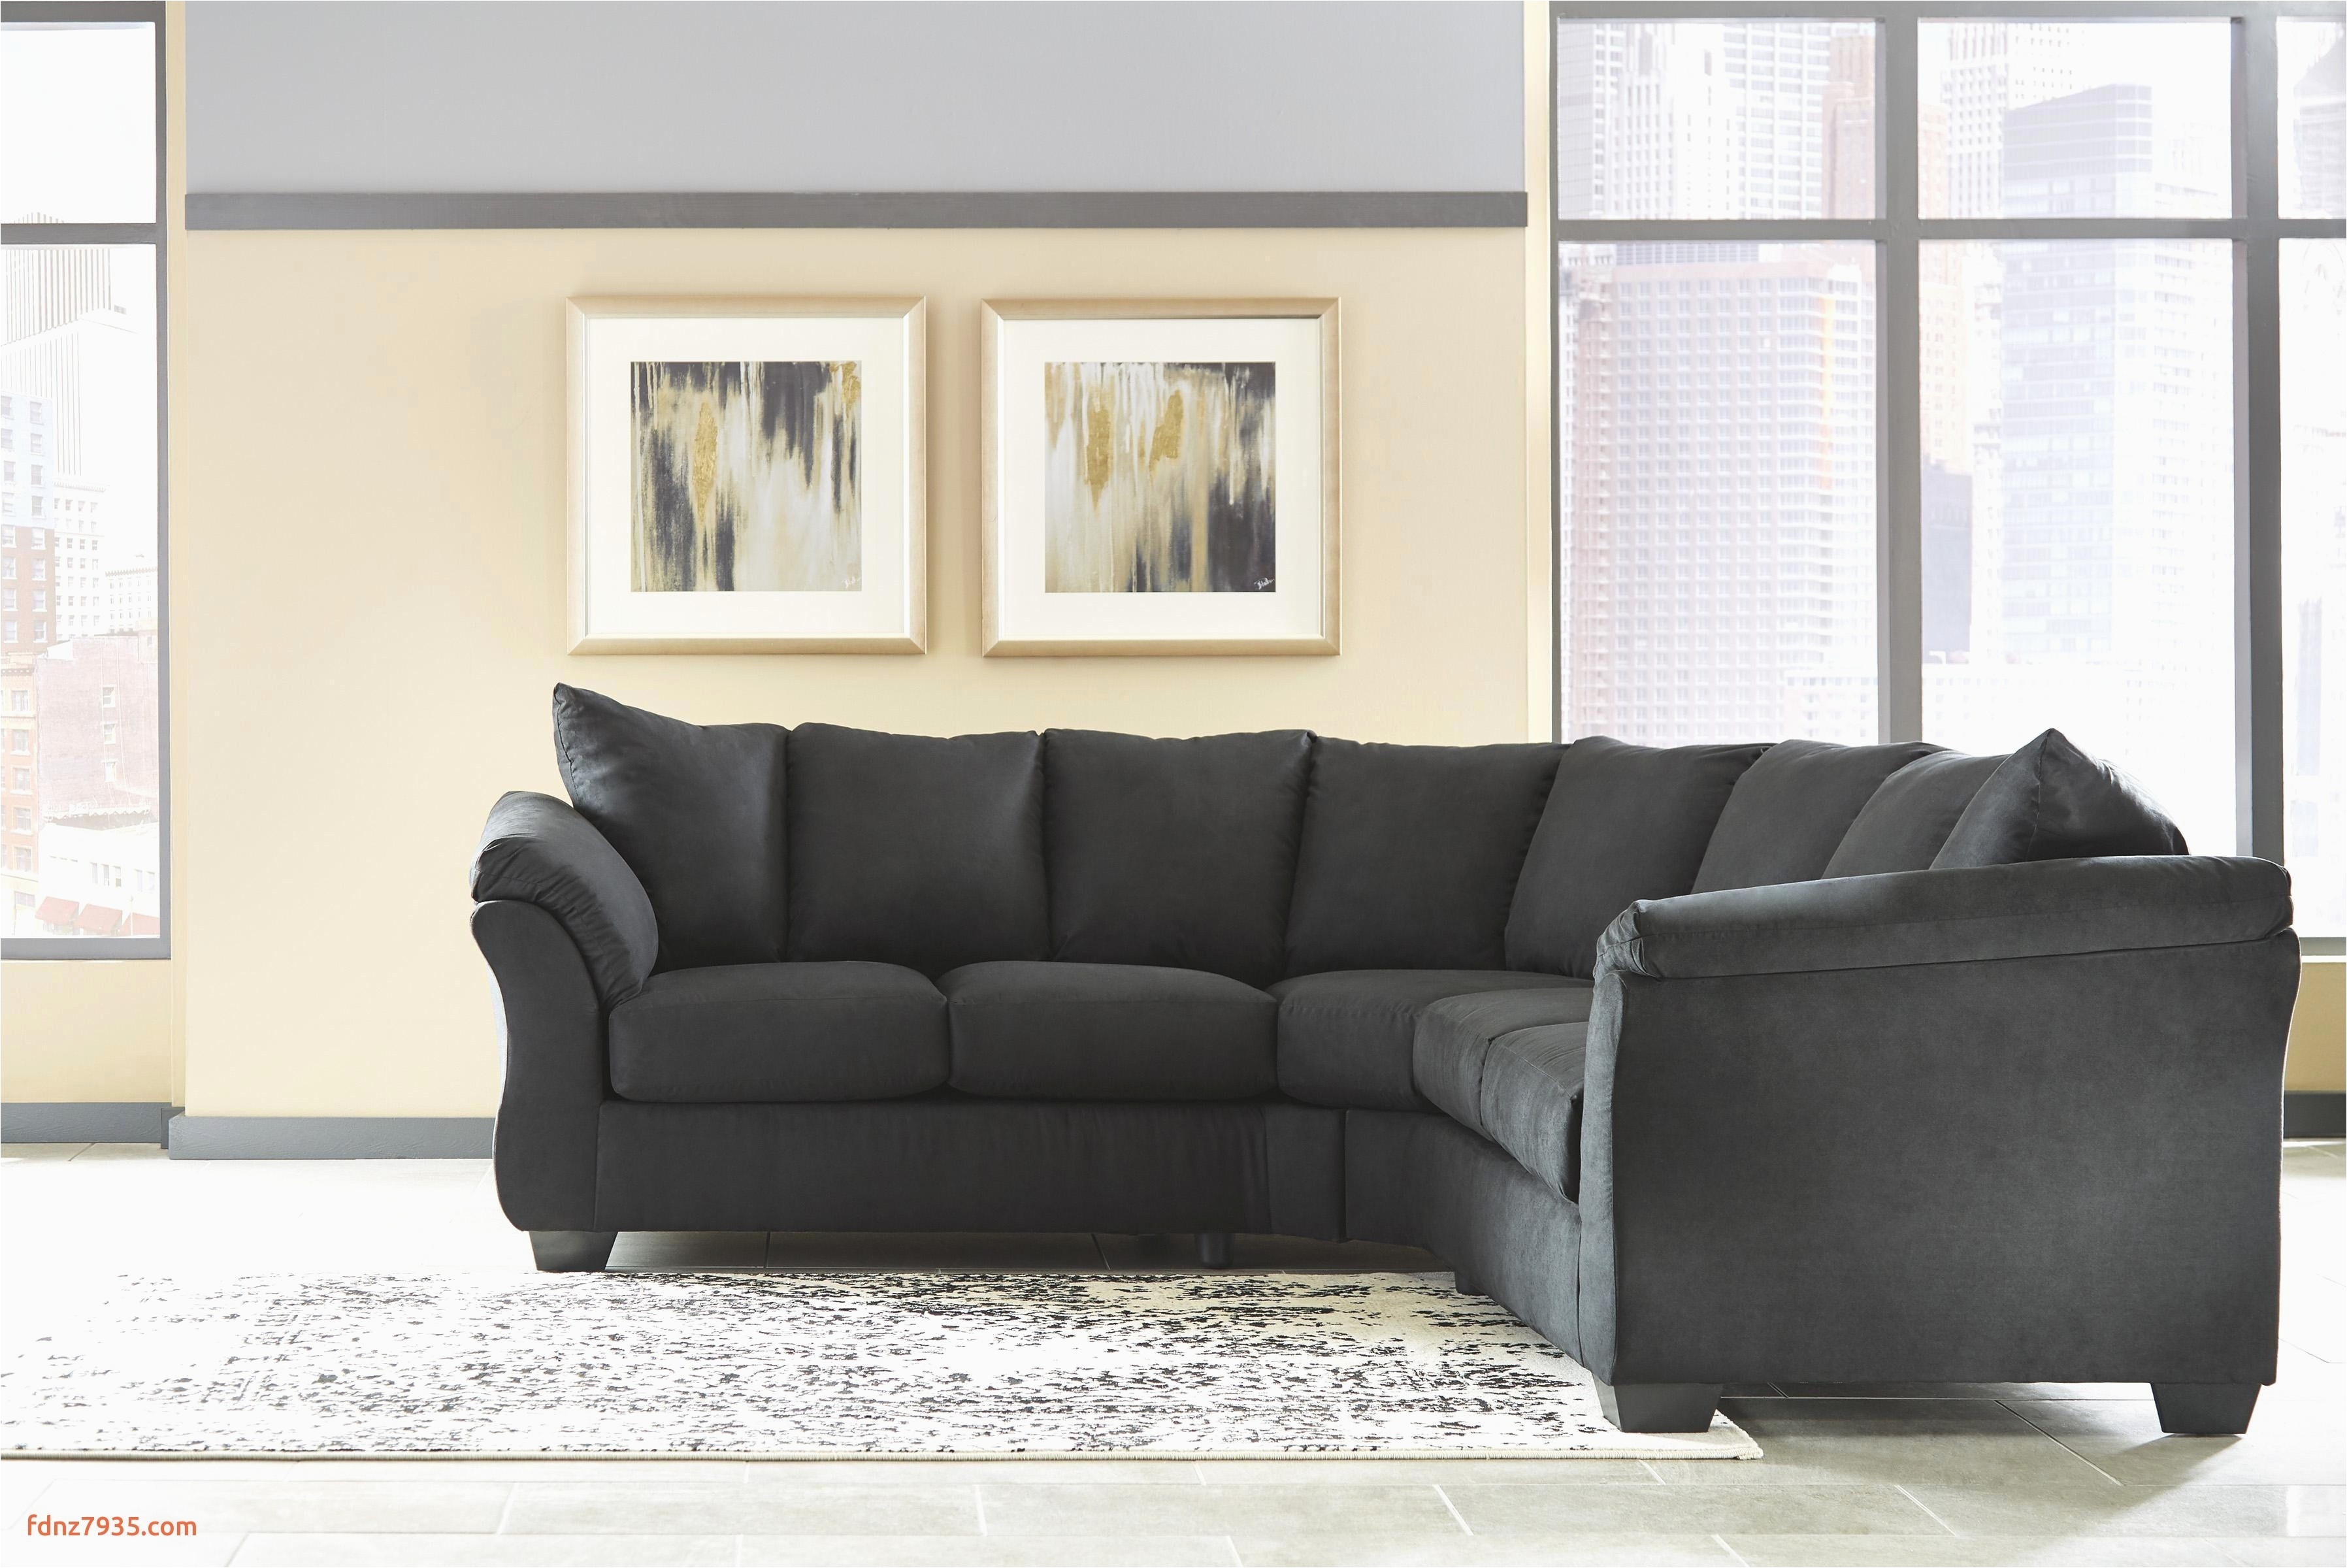 living room couches luxury living room ideas with sectional sofas luxury sectional couch 0d sectional 36 quirky ashley furniture